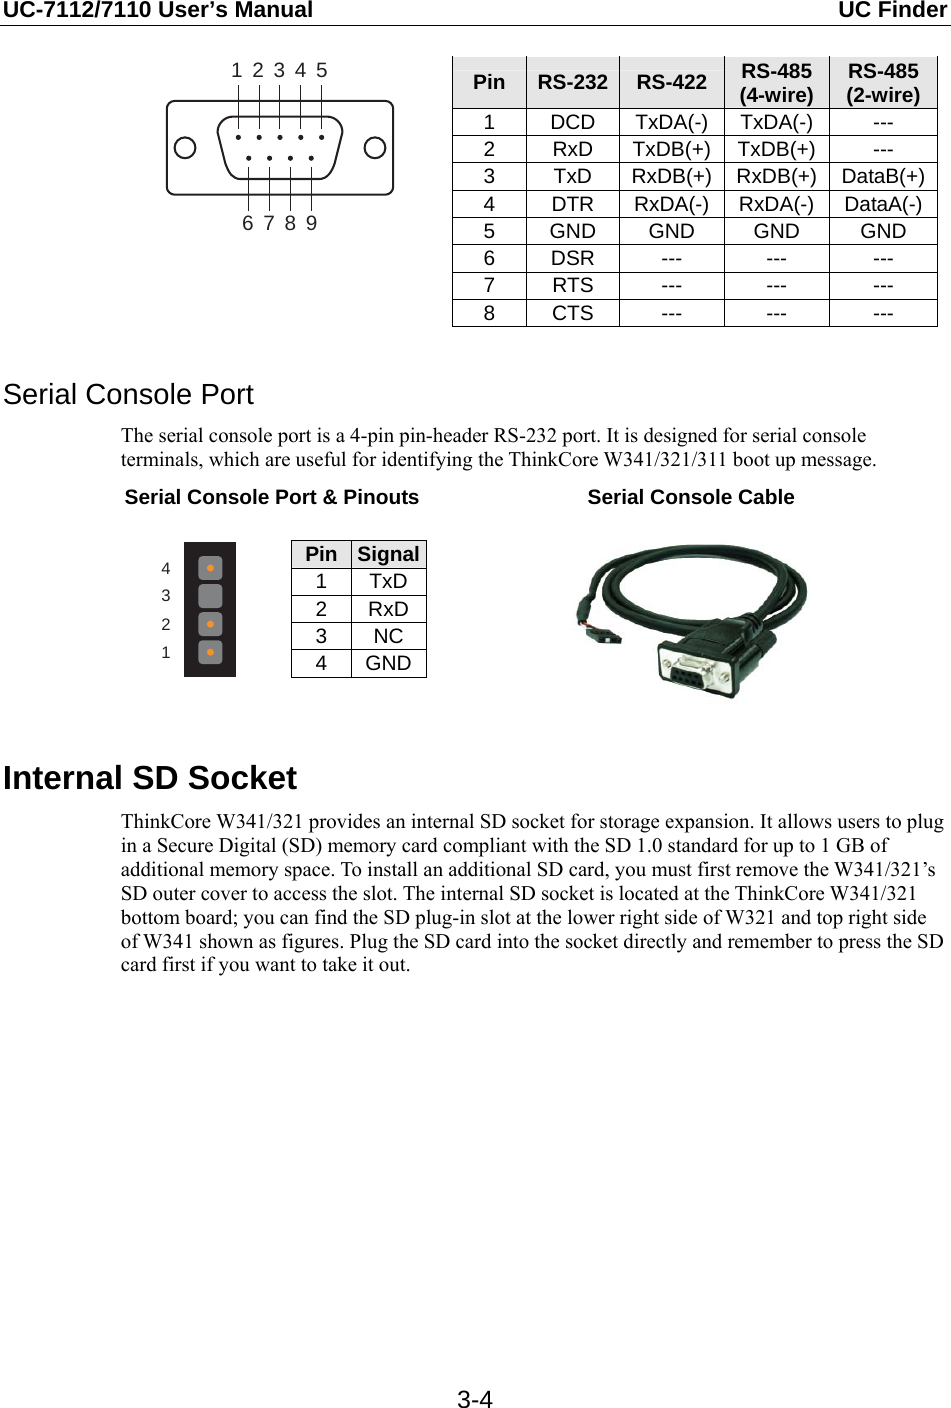 UC-7112/7110 User’s Manual  UC Finder   3-4123456789 Pin  RS-232 RS-422 RS-485 (4-wire)  RS-485(2-wire)1 DCD TxDA(-) TxDA(-)  --- 2 RxD TxDB(+) TxDB(+) --- 3 TxD RxDB(+) RxDB(+) DataB(+)4 DTR RxDA(-) RxDA(-) DataA(-)5 GND GND  GND  GND 6 DSR  ---  ---  --- 7 RTS  ---  ---  --- 8 CTS  ---  ---  ---   Serial Console Port The serial console port is a 4-pin pin-header RS-232 port. It is designed for serial console terminals, which are useful for identifying the ThinkCore W341/321/311 boot up message. Serial Console Port &amp; Pinouts Serial Console Cable  4321 Pin  Signal1 TxD2 RxD3 NC 4 GND    Internal SD Socket ThinkCore W341/321 provides an internal SD socket for storage expansion. It allows users to plug in a Secure Digital (SD) memory card compliant with the SD 1.0 standard for up to 1 GB of additional memory space. To install an additional SD card, you must first remove the W341/321’s SD outer cover to access the slot. The internal SD socket is located at the ThinkCore W341/321 bottom board; you can find the SD plug-in slot at the lower right side of W321 and top right side of W341 shown as figures. Plug the SD card into the socket directly and remember to press the SD card first if you want to take it out.  